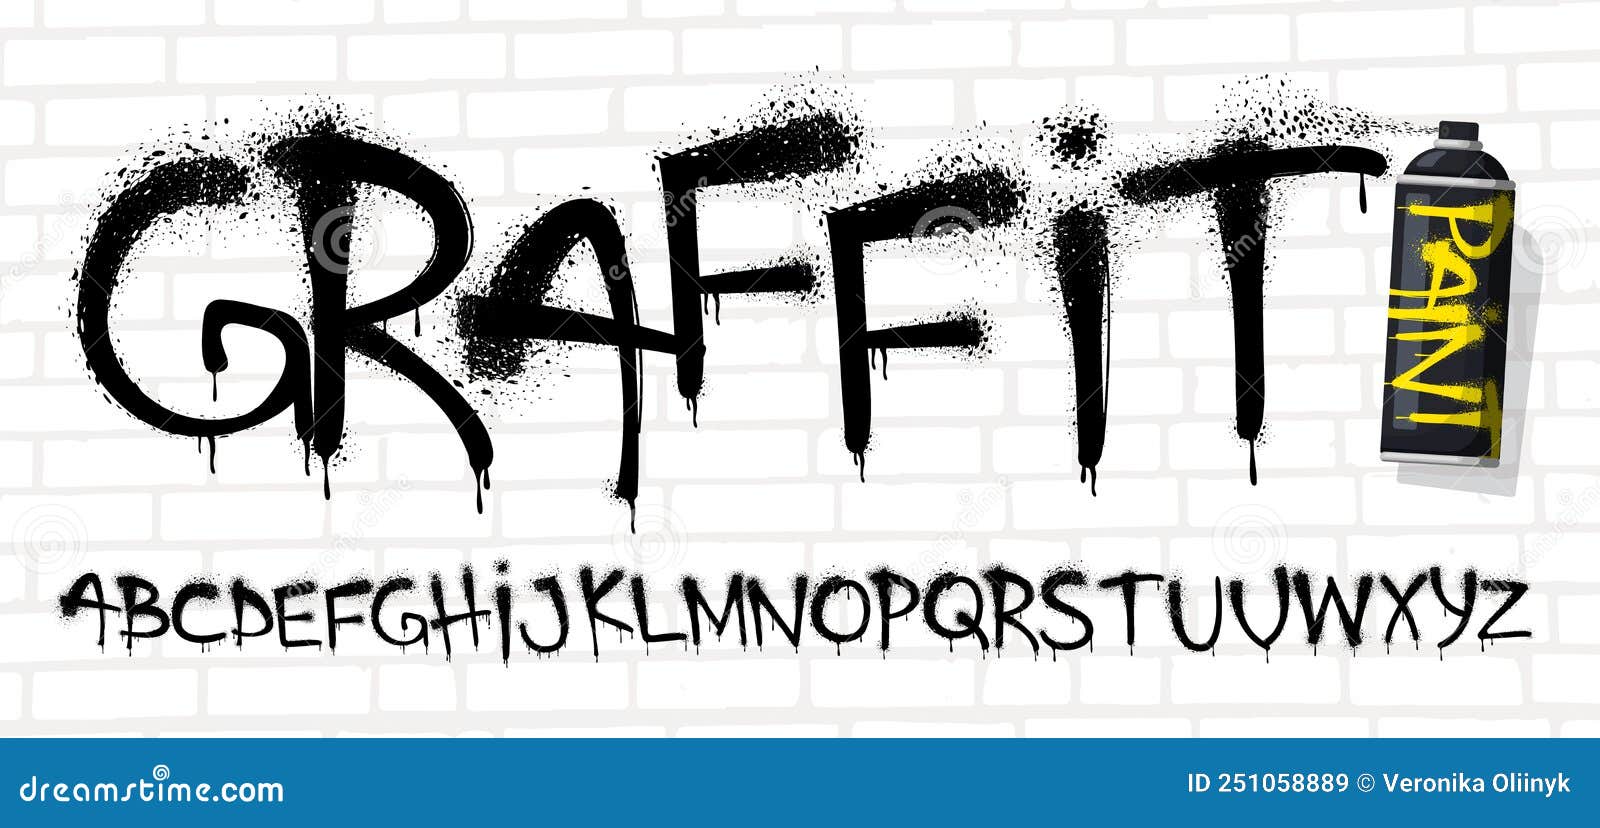 spray graffiti font. urban wall tagging lettering, street art text with sprayed paint texture effect and grunge capital